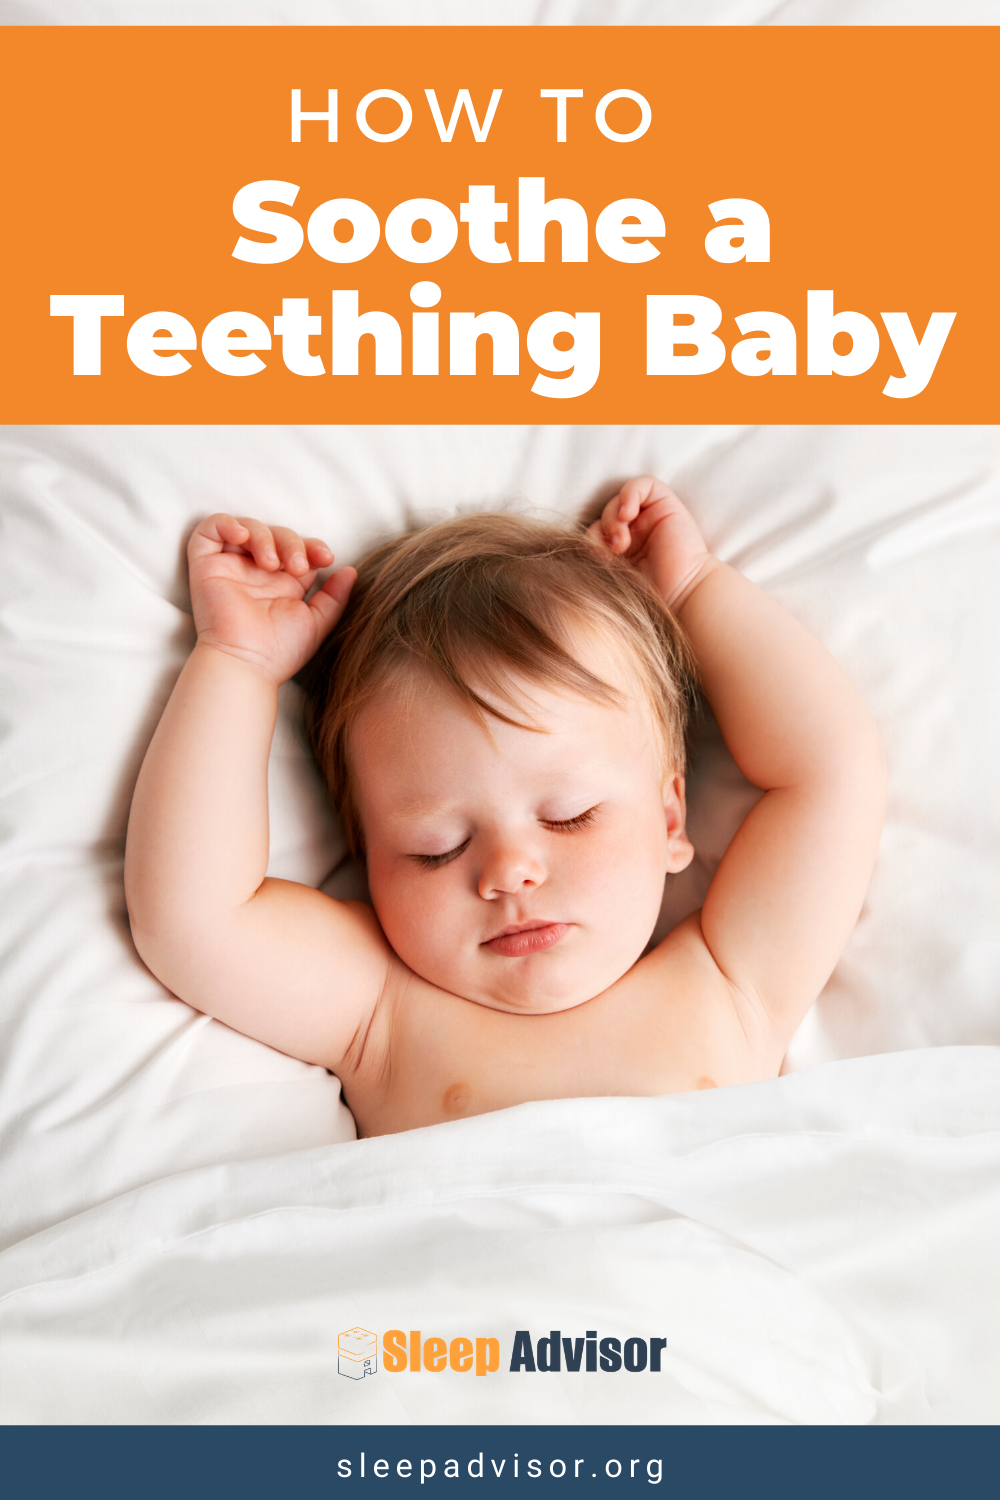 How to Soothe a Teething Baby at Night